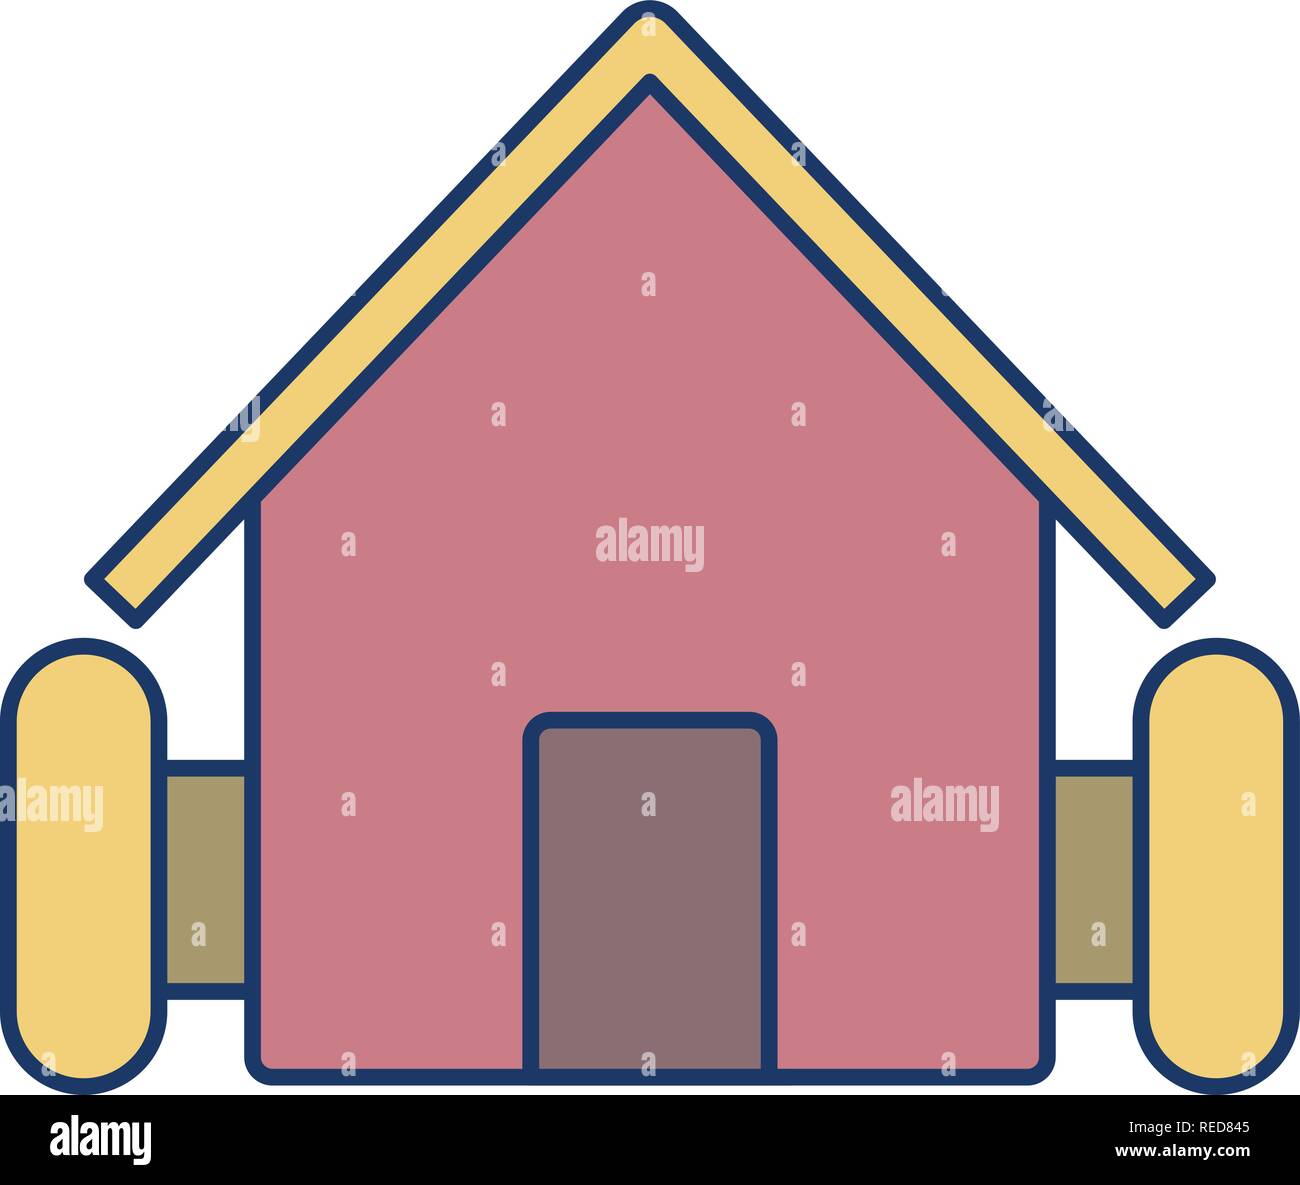 Farm House Vector Icon Sign Icon Vector Illustration For Personal And Commercial Use... Clean Look Trendy Icon... Stock Vector